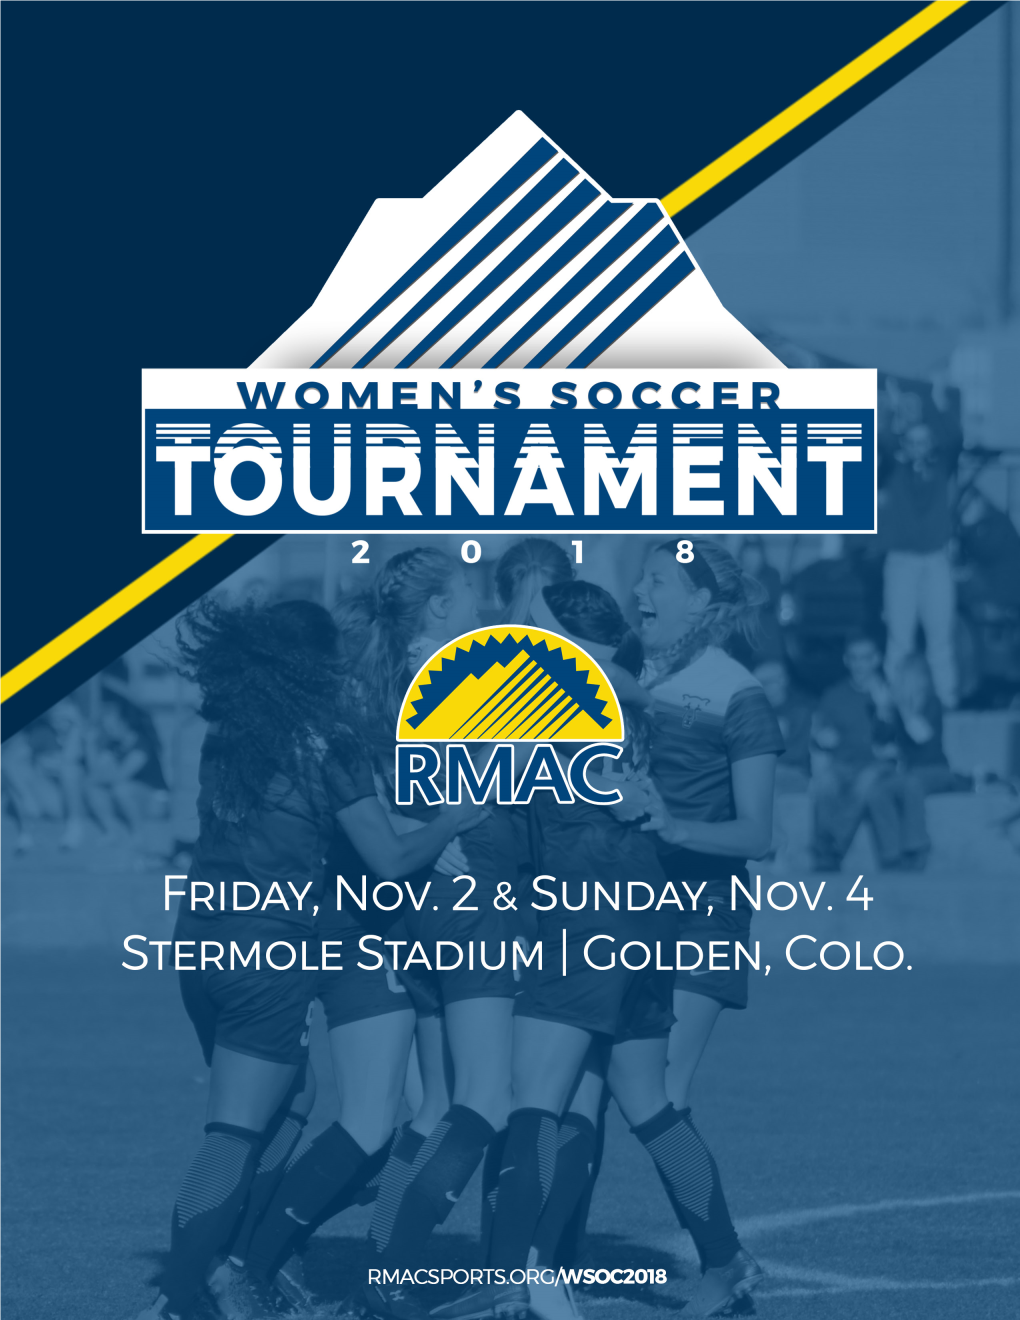 RMACSPORTS.ORG #Rmacwsoc #Championshipselevated 2018 ROCKY MOUNTAIN ATHLETIC CONFERENCE WOMEN’S SOCCER TOURNAMENT GOLDEN, COLO